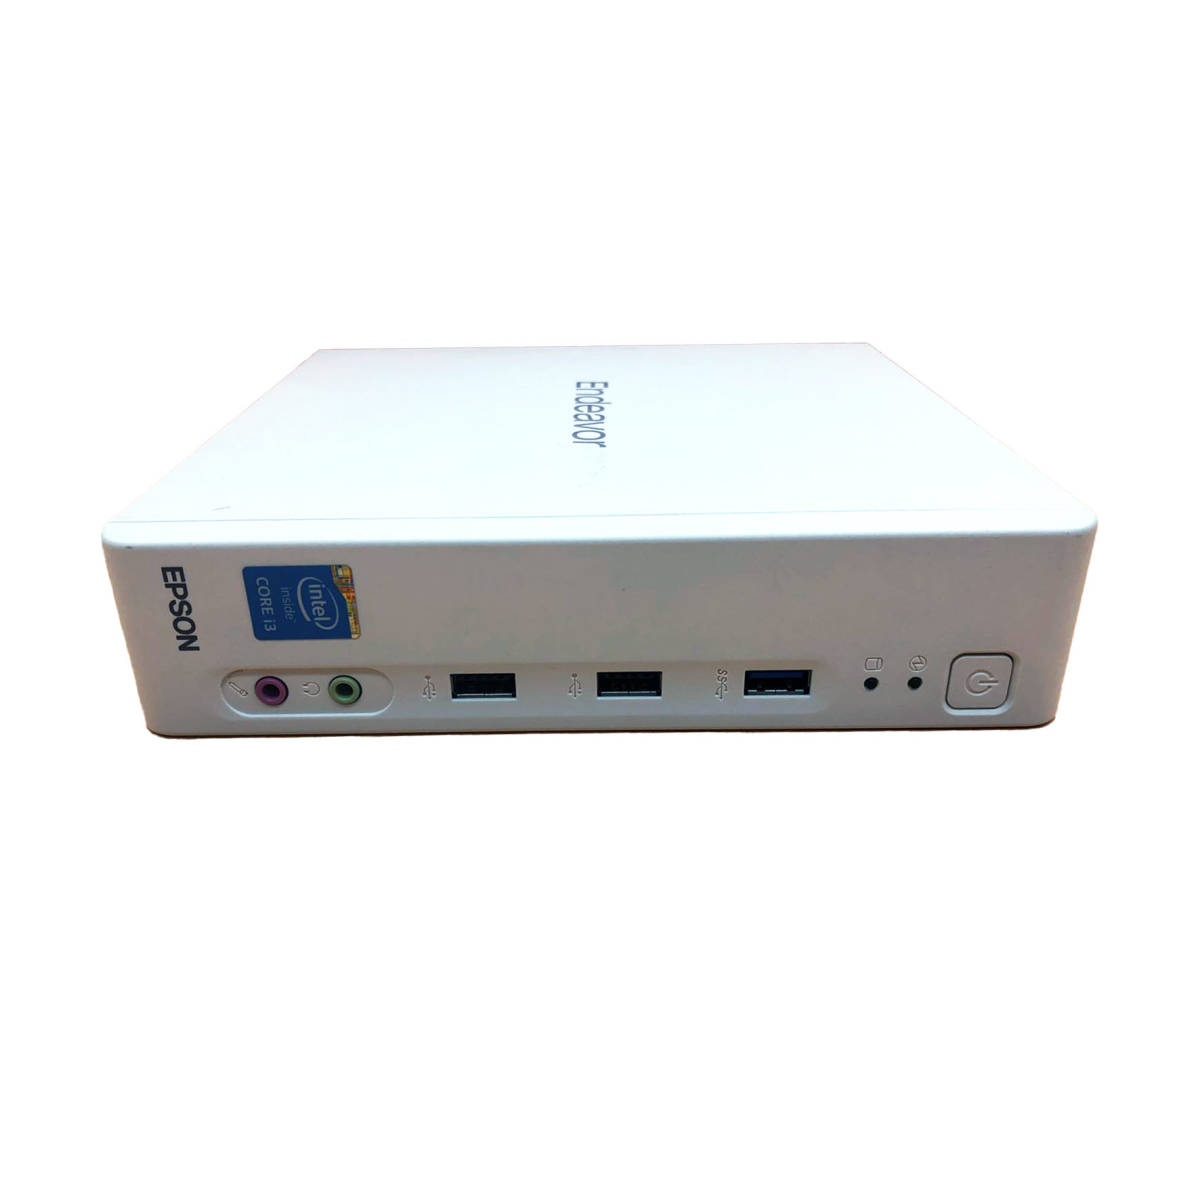 . speed start-up used super-beauty goods EPSON( Epson ) Endeavor ST170E MSoffice2021 Win11Pro no. four generation Corei3 memory 8GB SSD128+HDD320GB USB3.0 wireless F